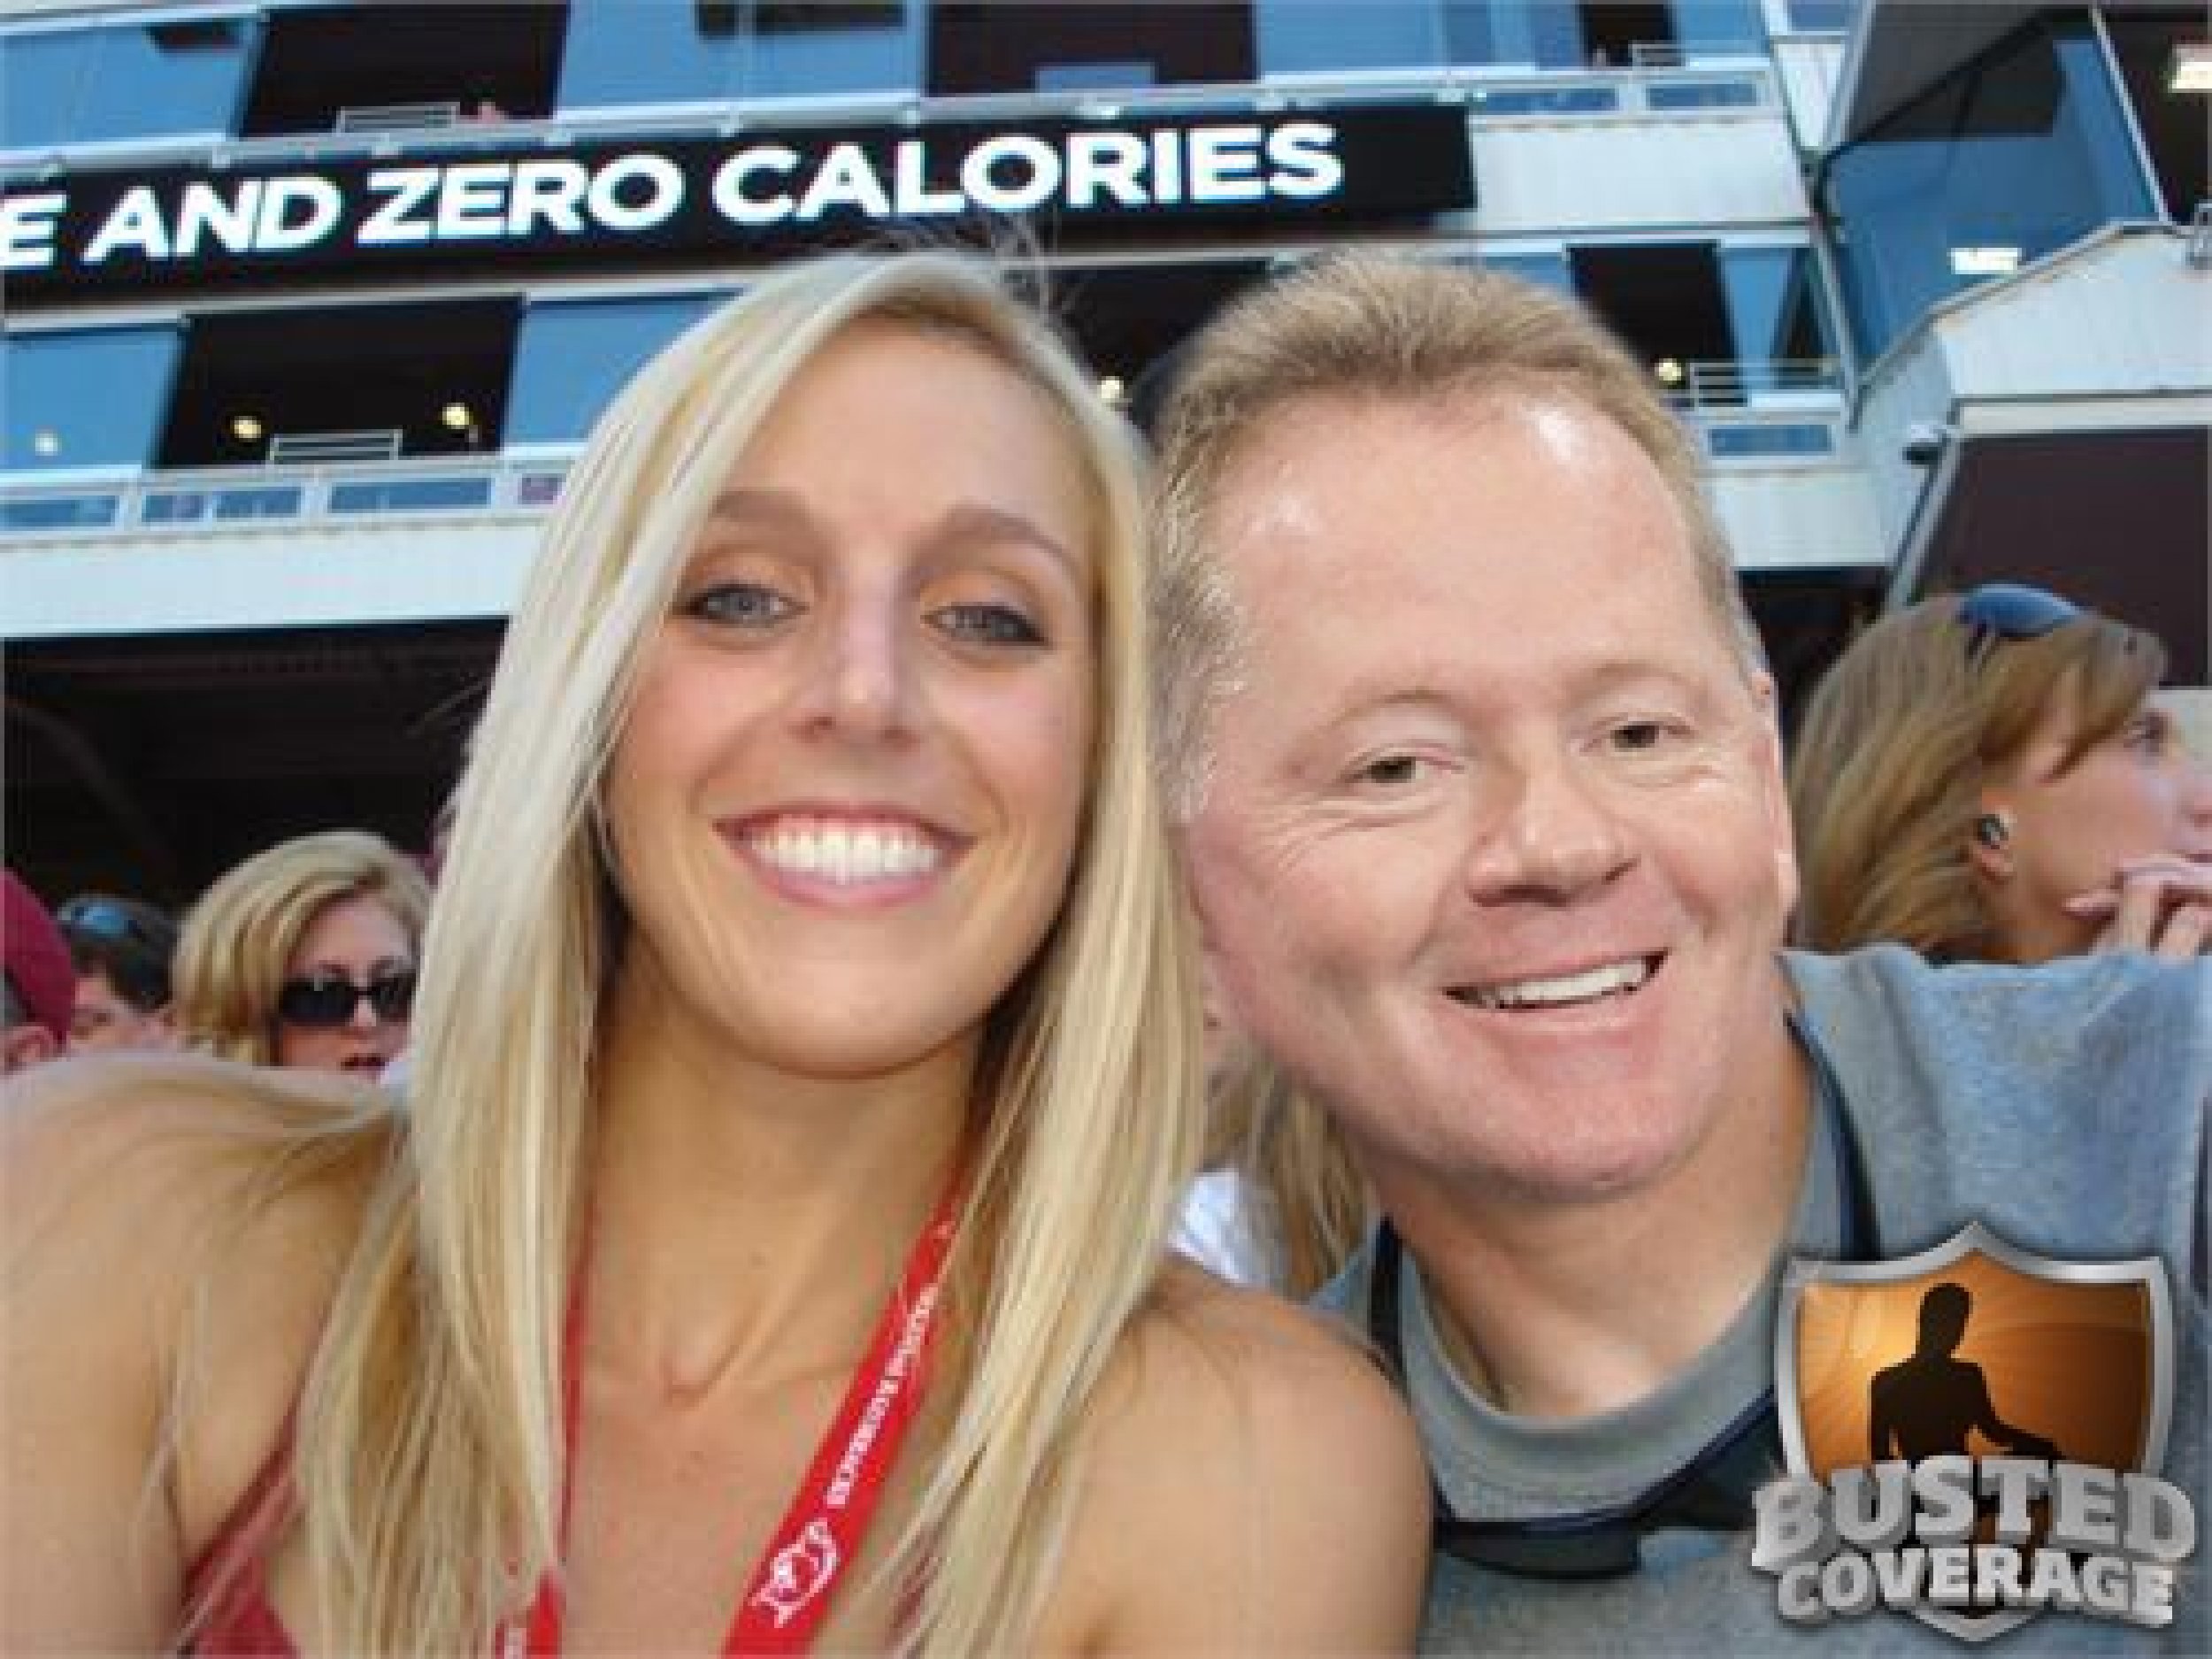 Bobby Petrino Who Could He Get Lucky With On Friday The 13th? [PHOTOS]